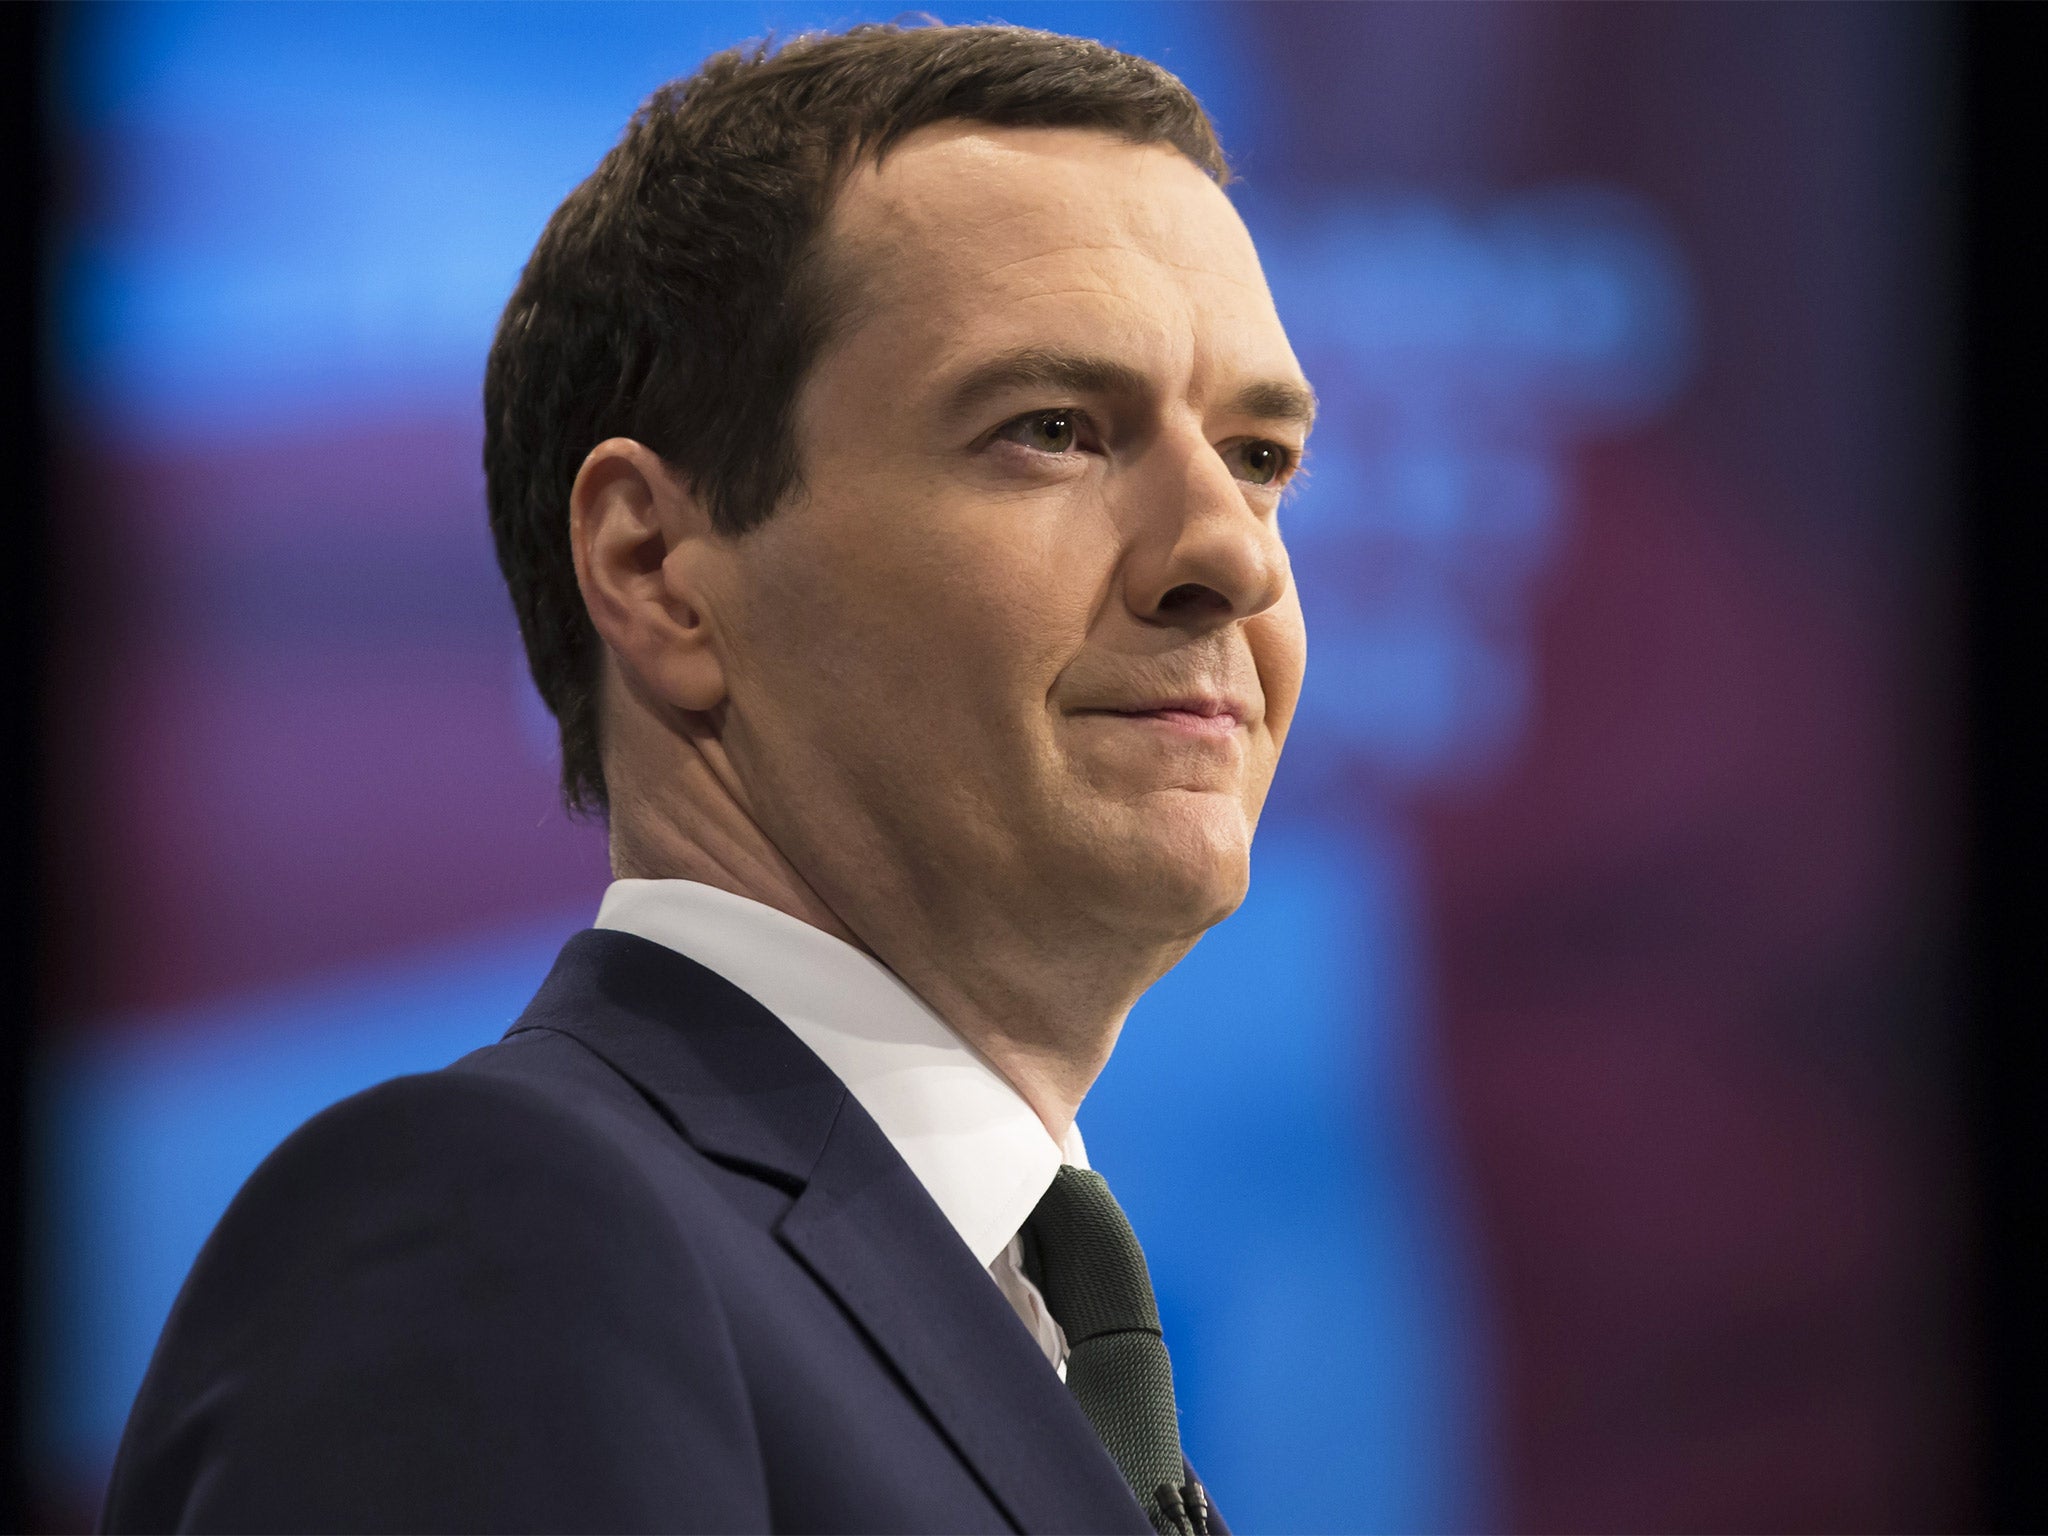 The Chancellor is facing a growing Tory rebellion